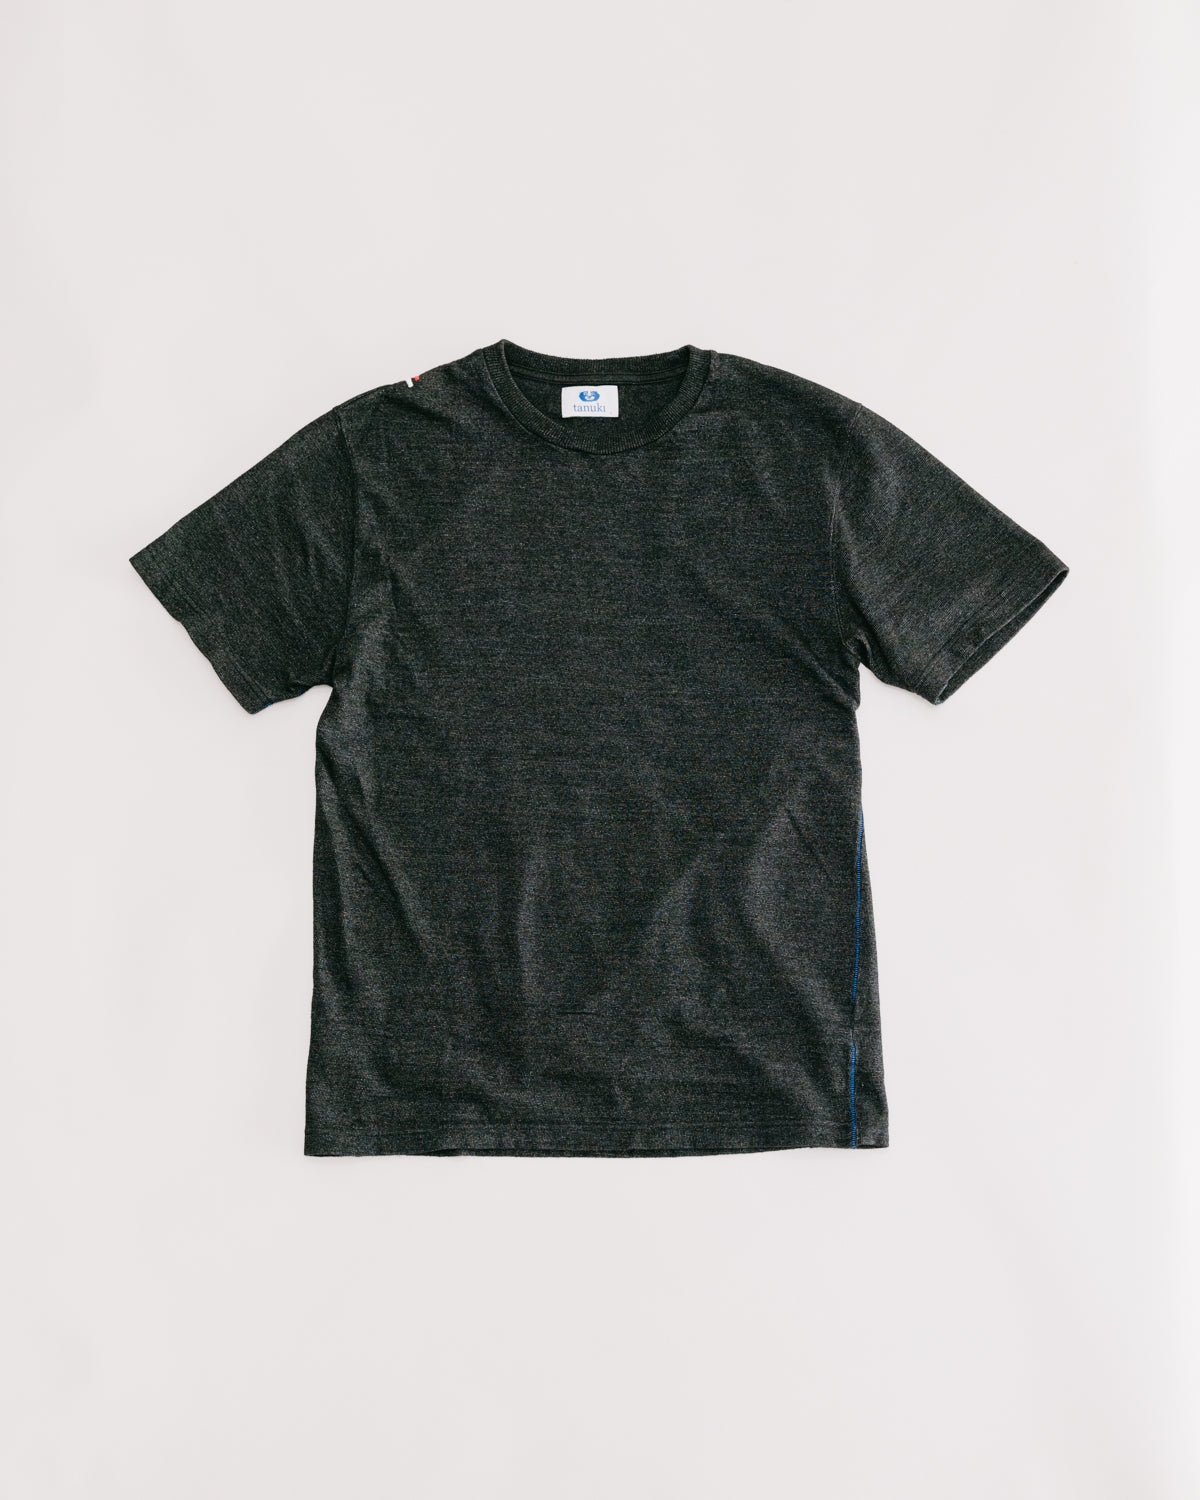 GY8714S - Gyoten Heavy T-Shirt - Natural Sumi Ink Dye